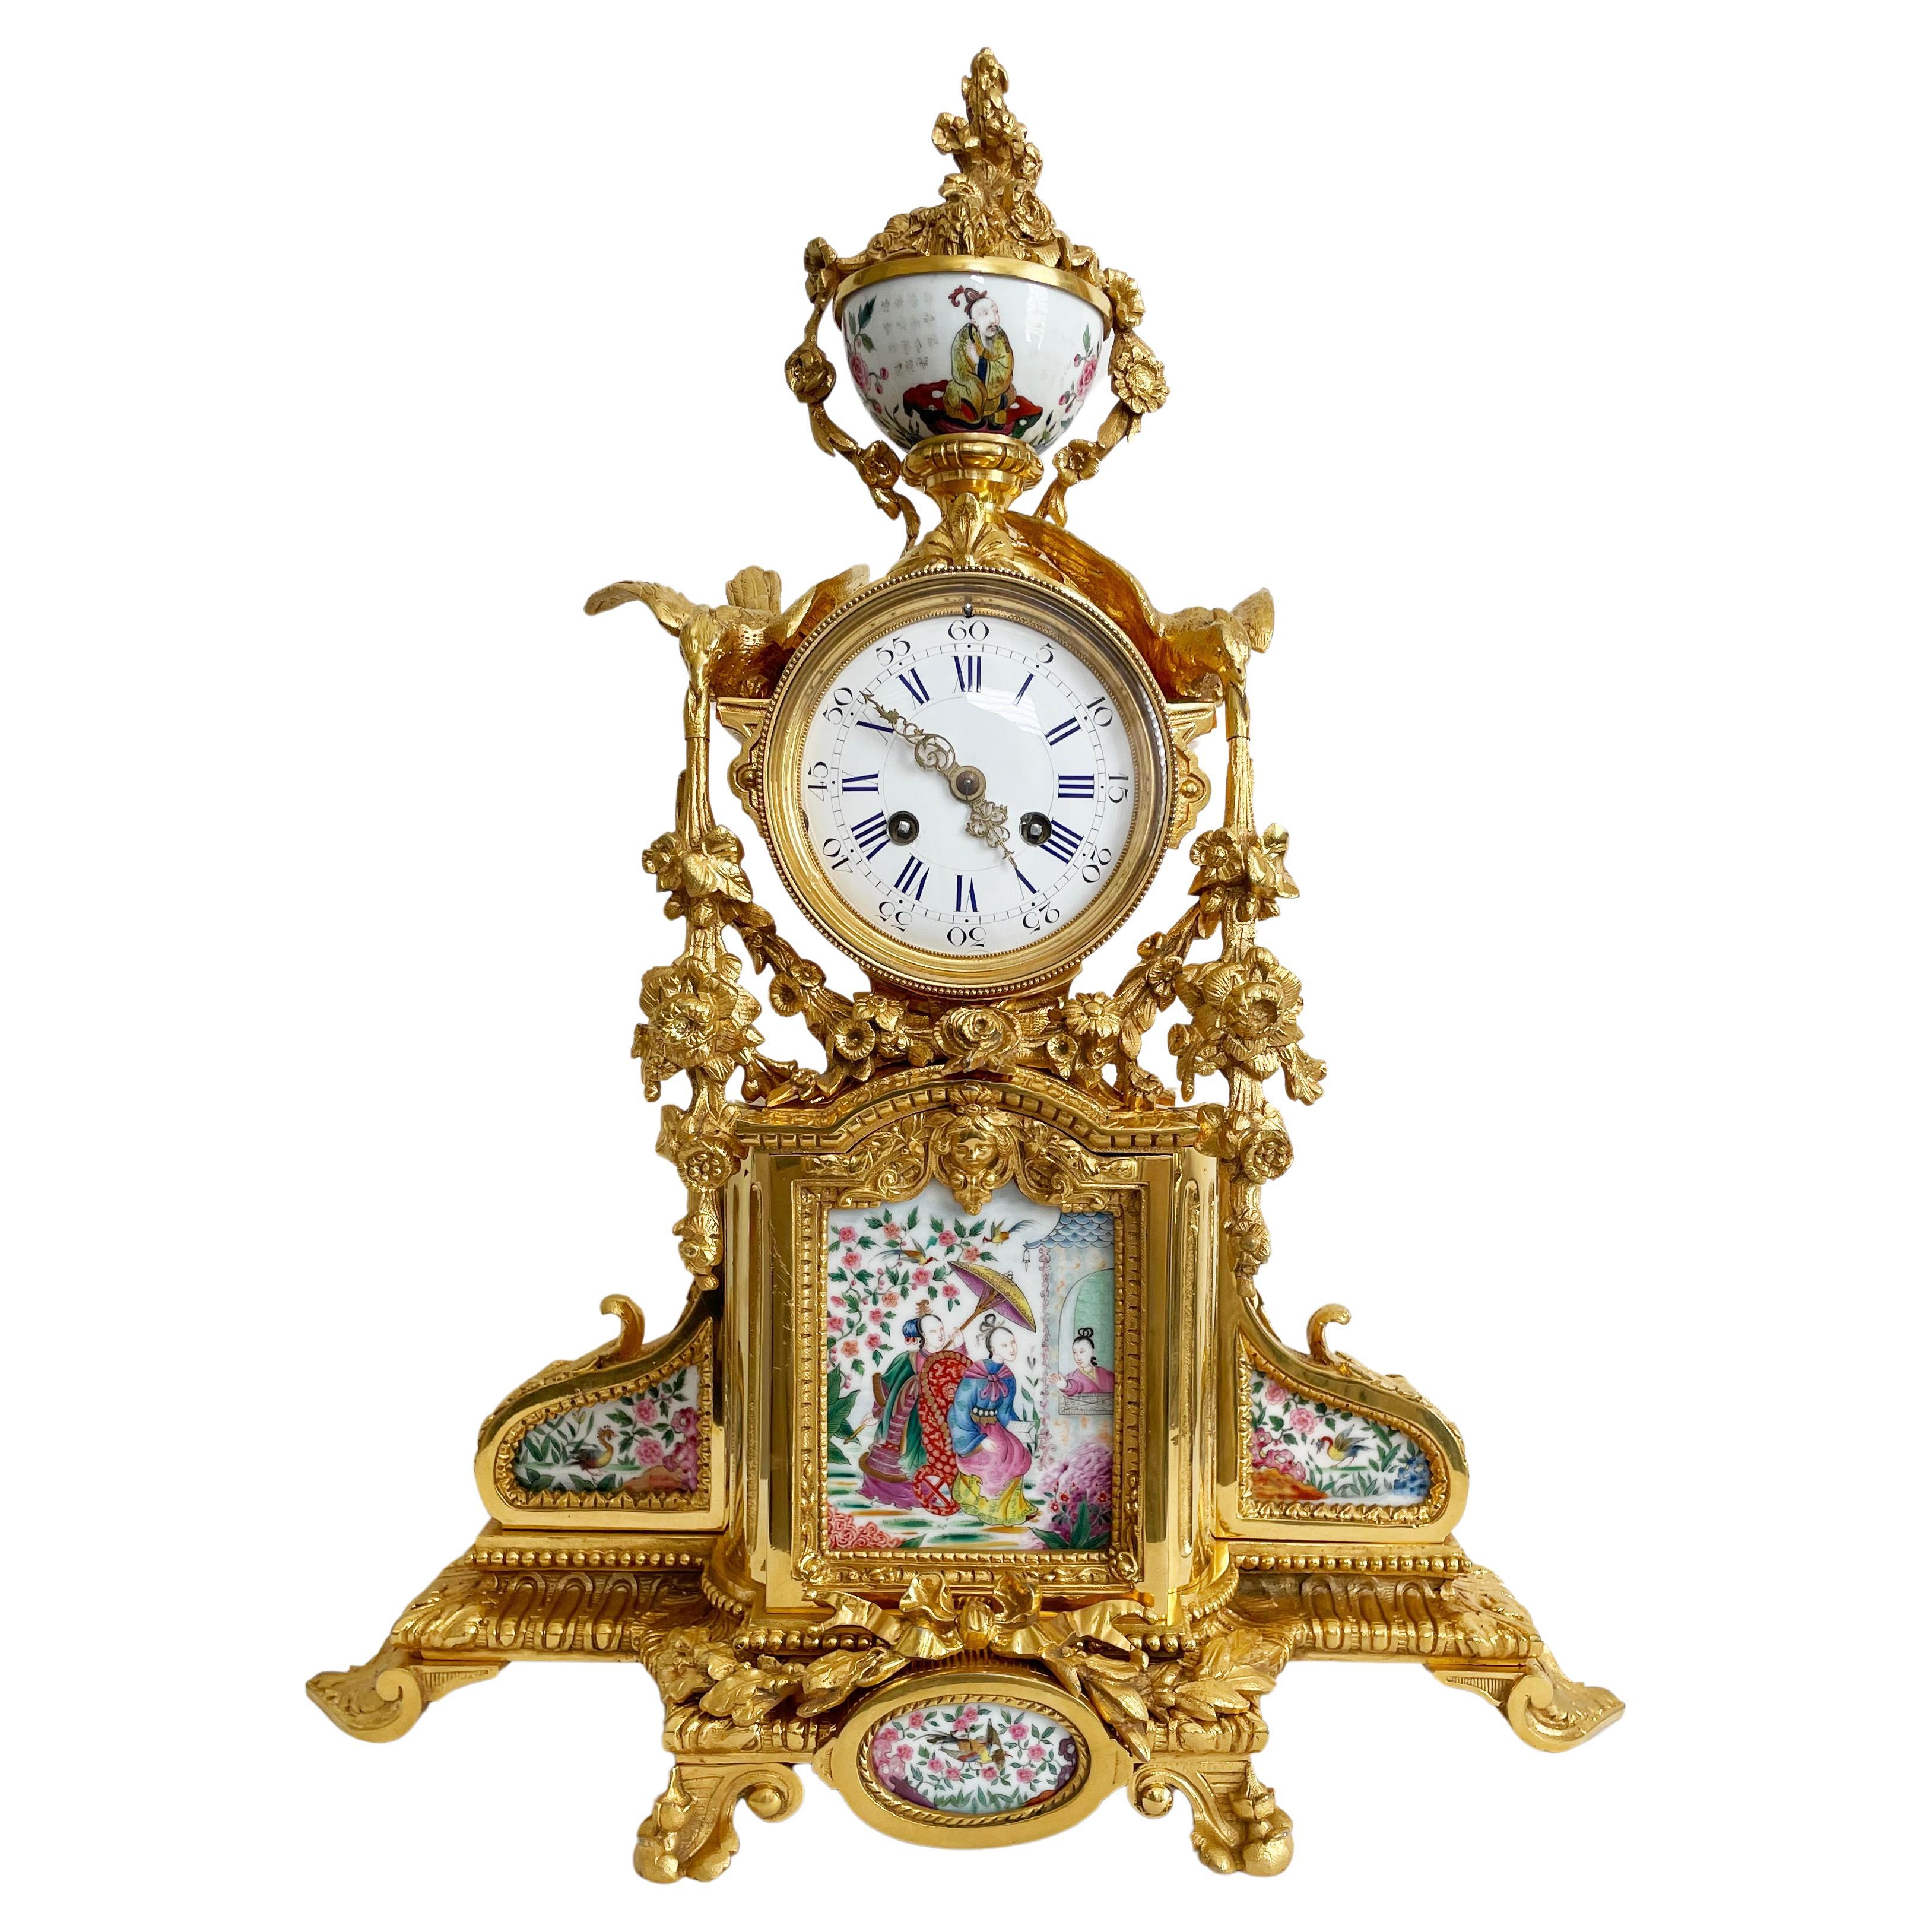 French Gilt Bronze And Porcelain Chinoiserie Themed Mantel Clock, 19th Century